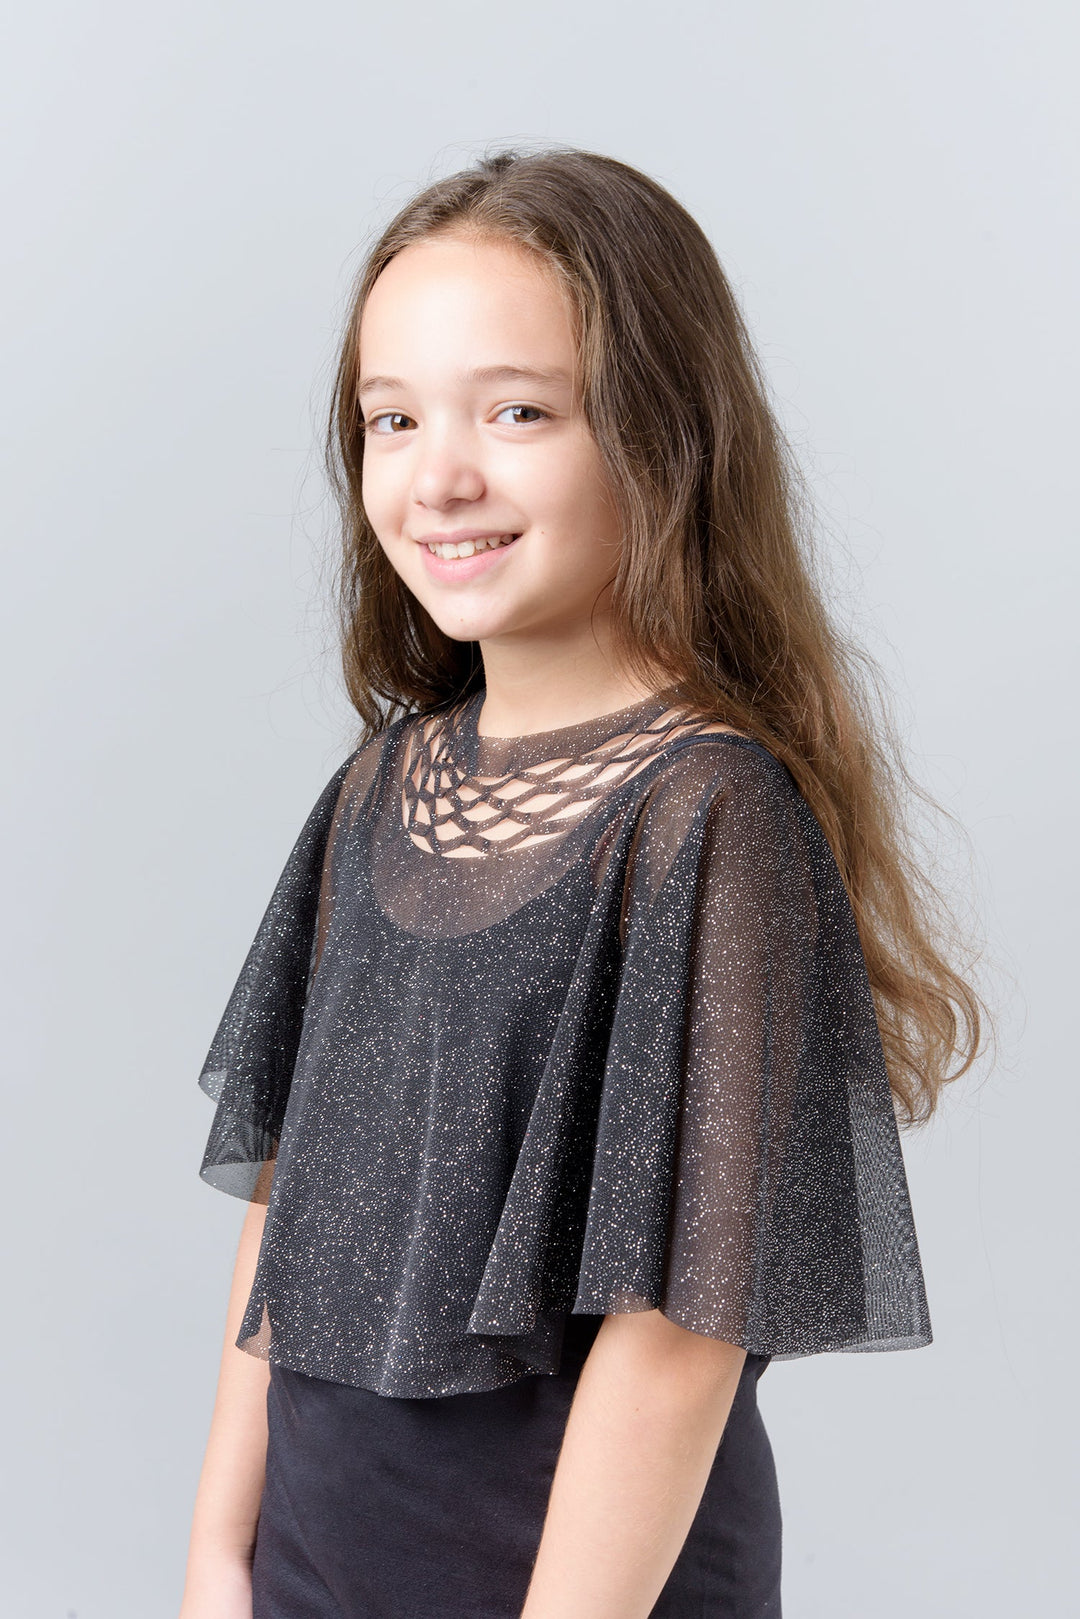 Glittering black top for a girl - a top for a girl for an event with laser cutting